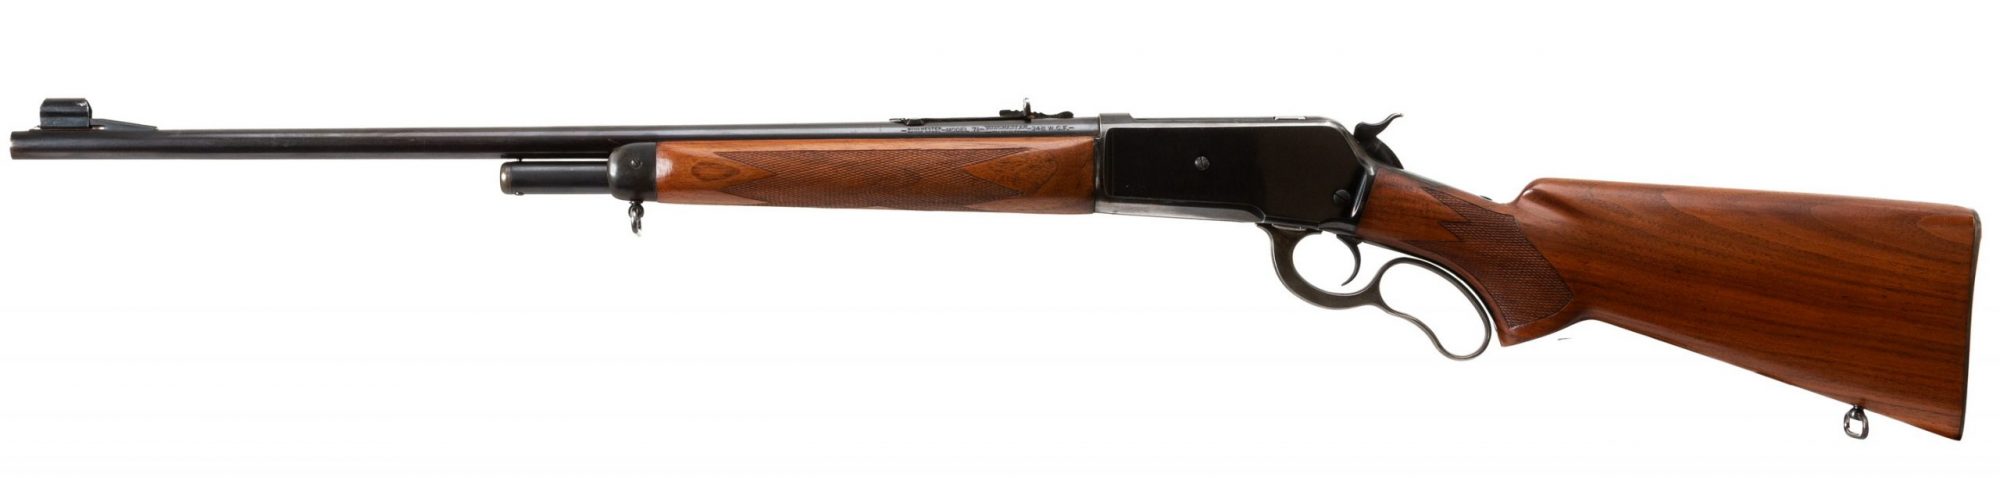 Photo of a pre-owned Winchester Model 71 from 1941, for sale by Turnbull Restoration of Bloomfield, NY